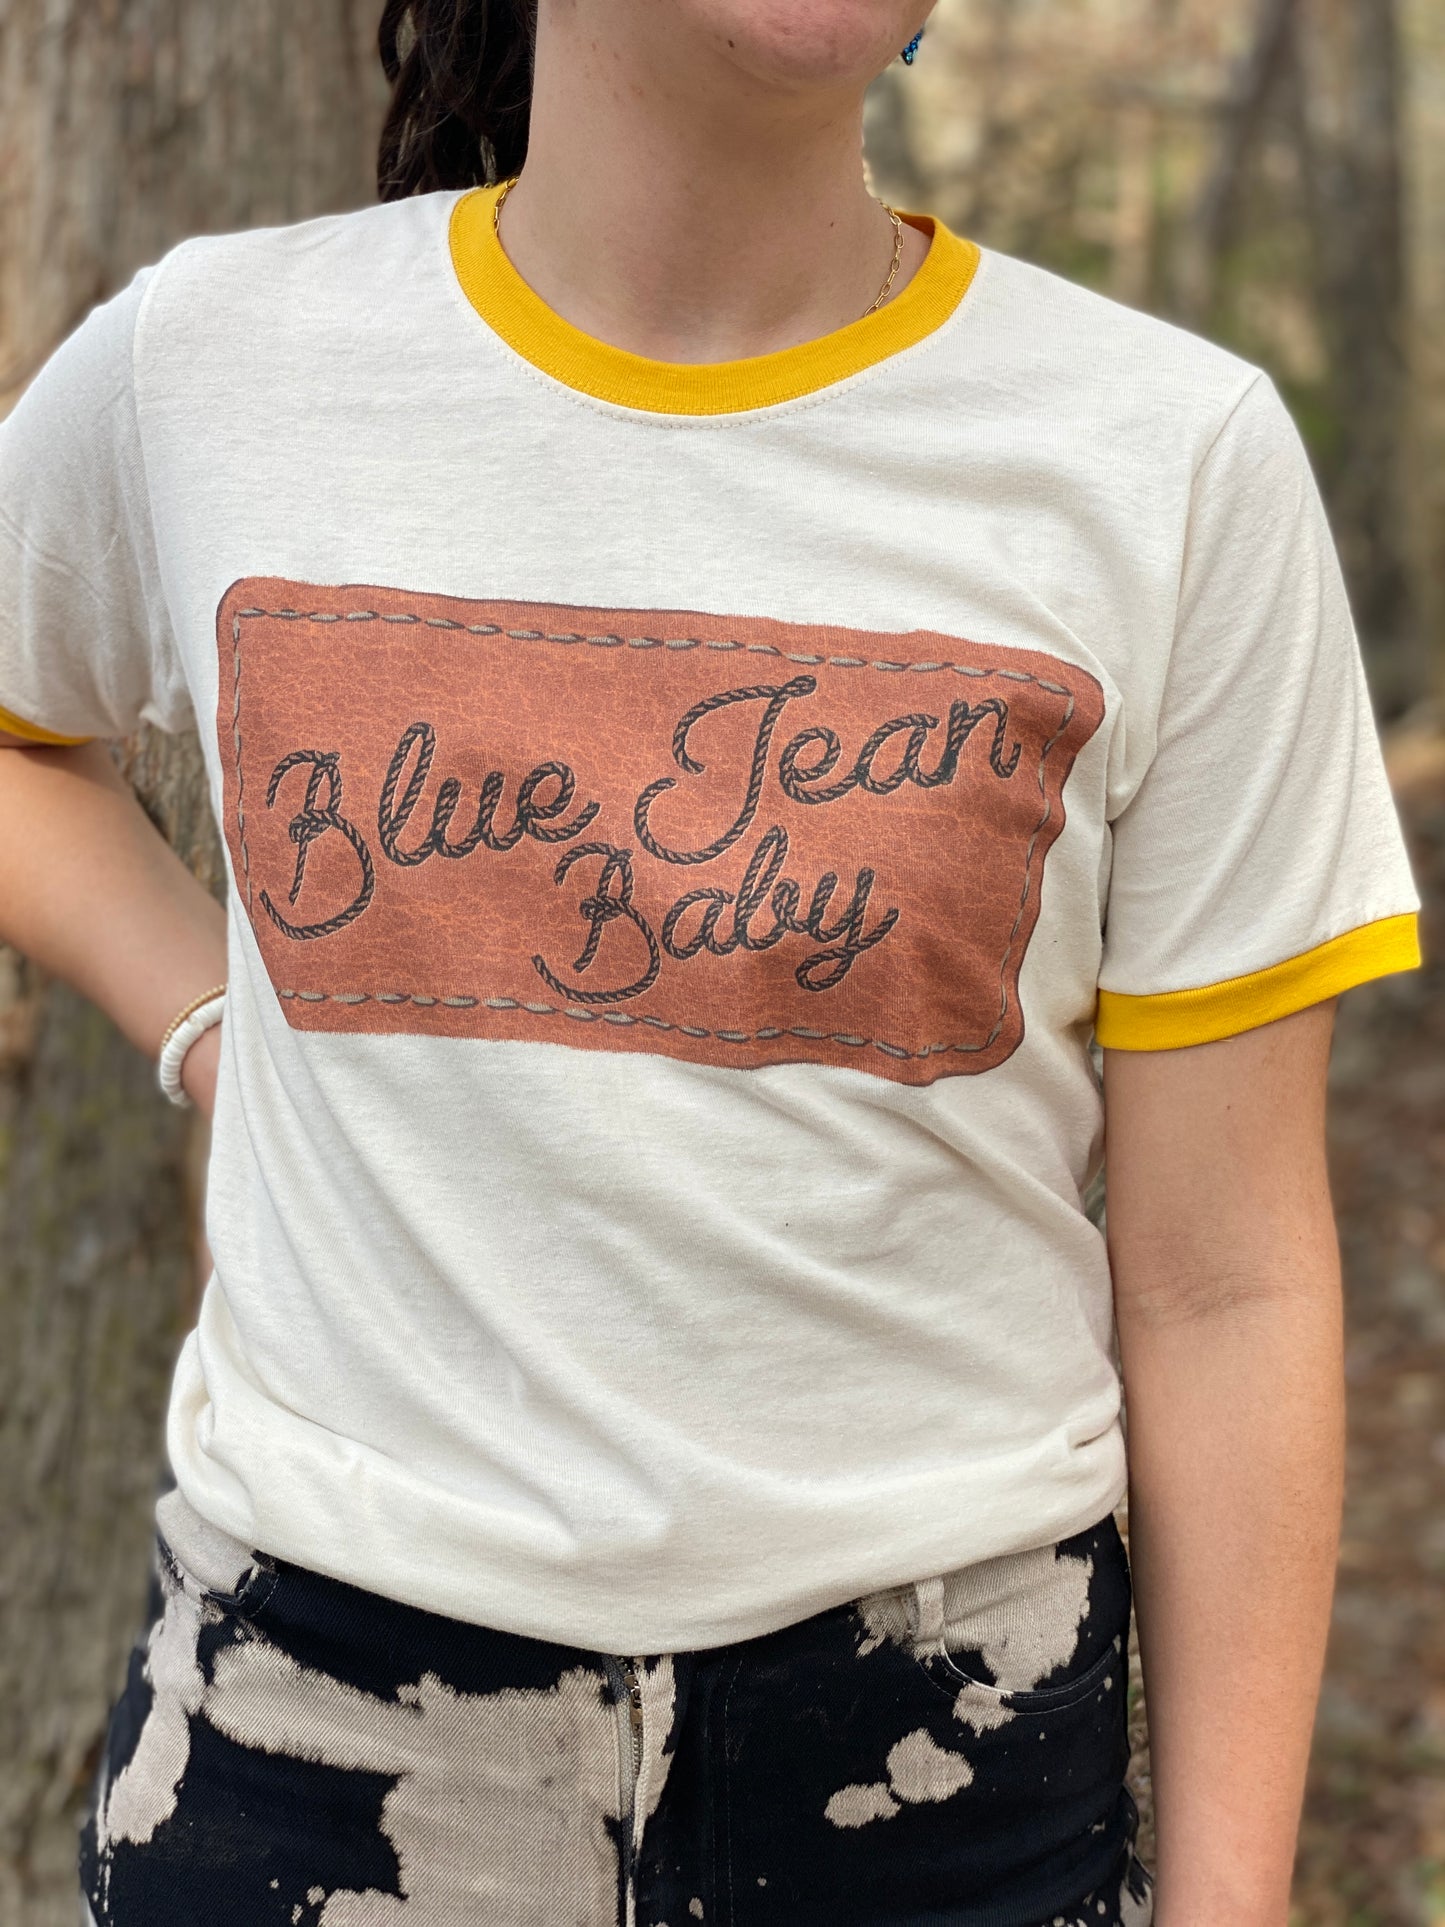 Blue Jean Baby Western Graphic Tee